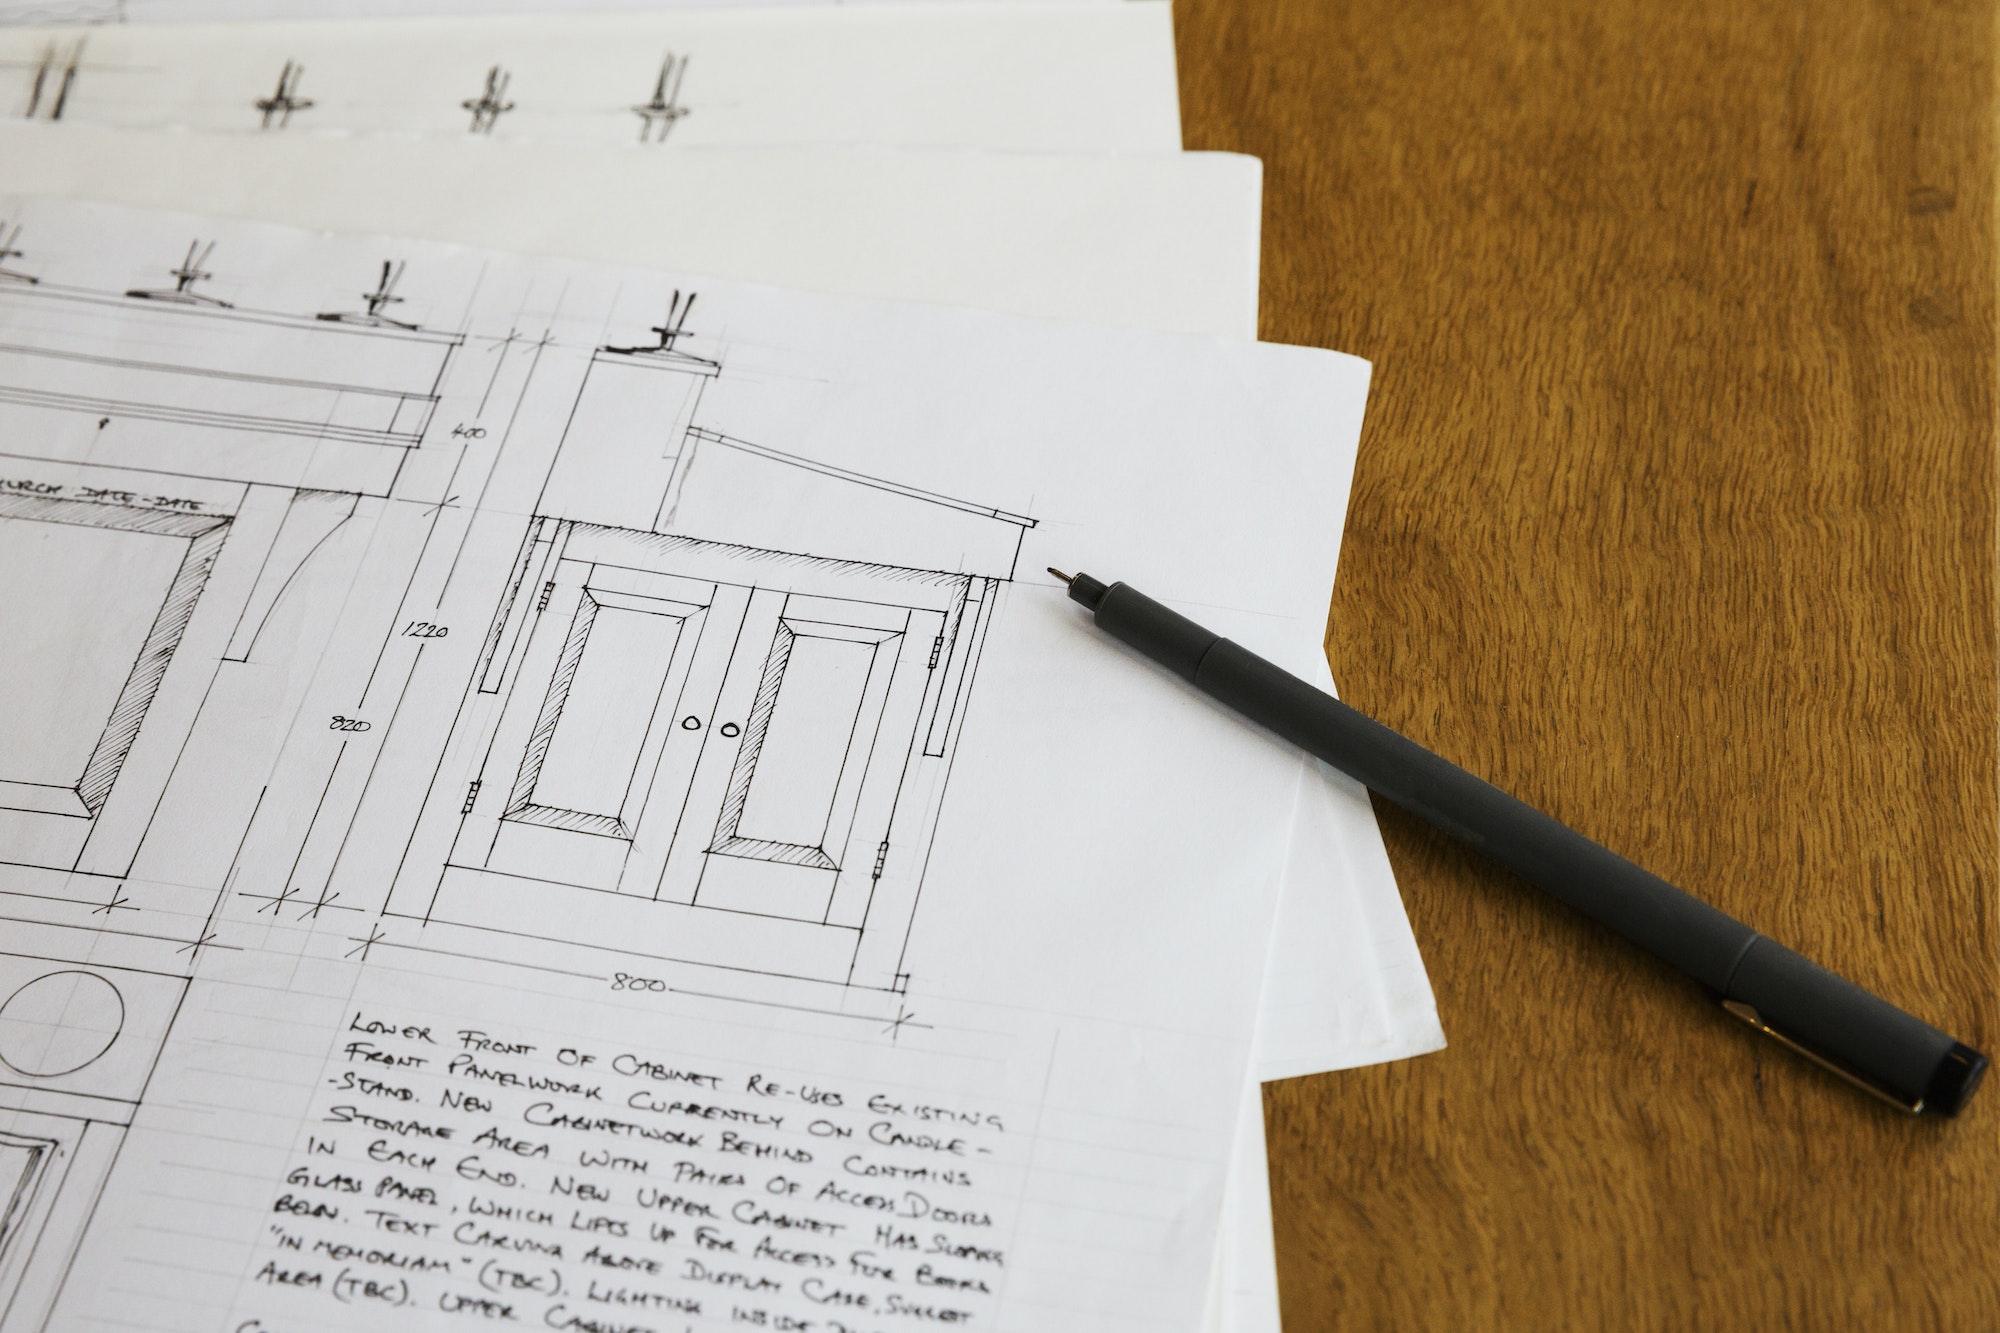 Close up of design drawings for a cabinet, handwritten notes.